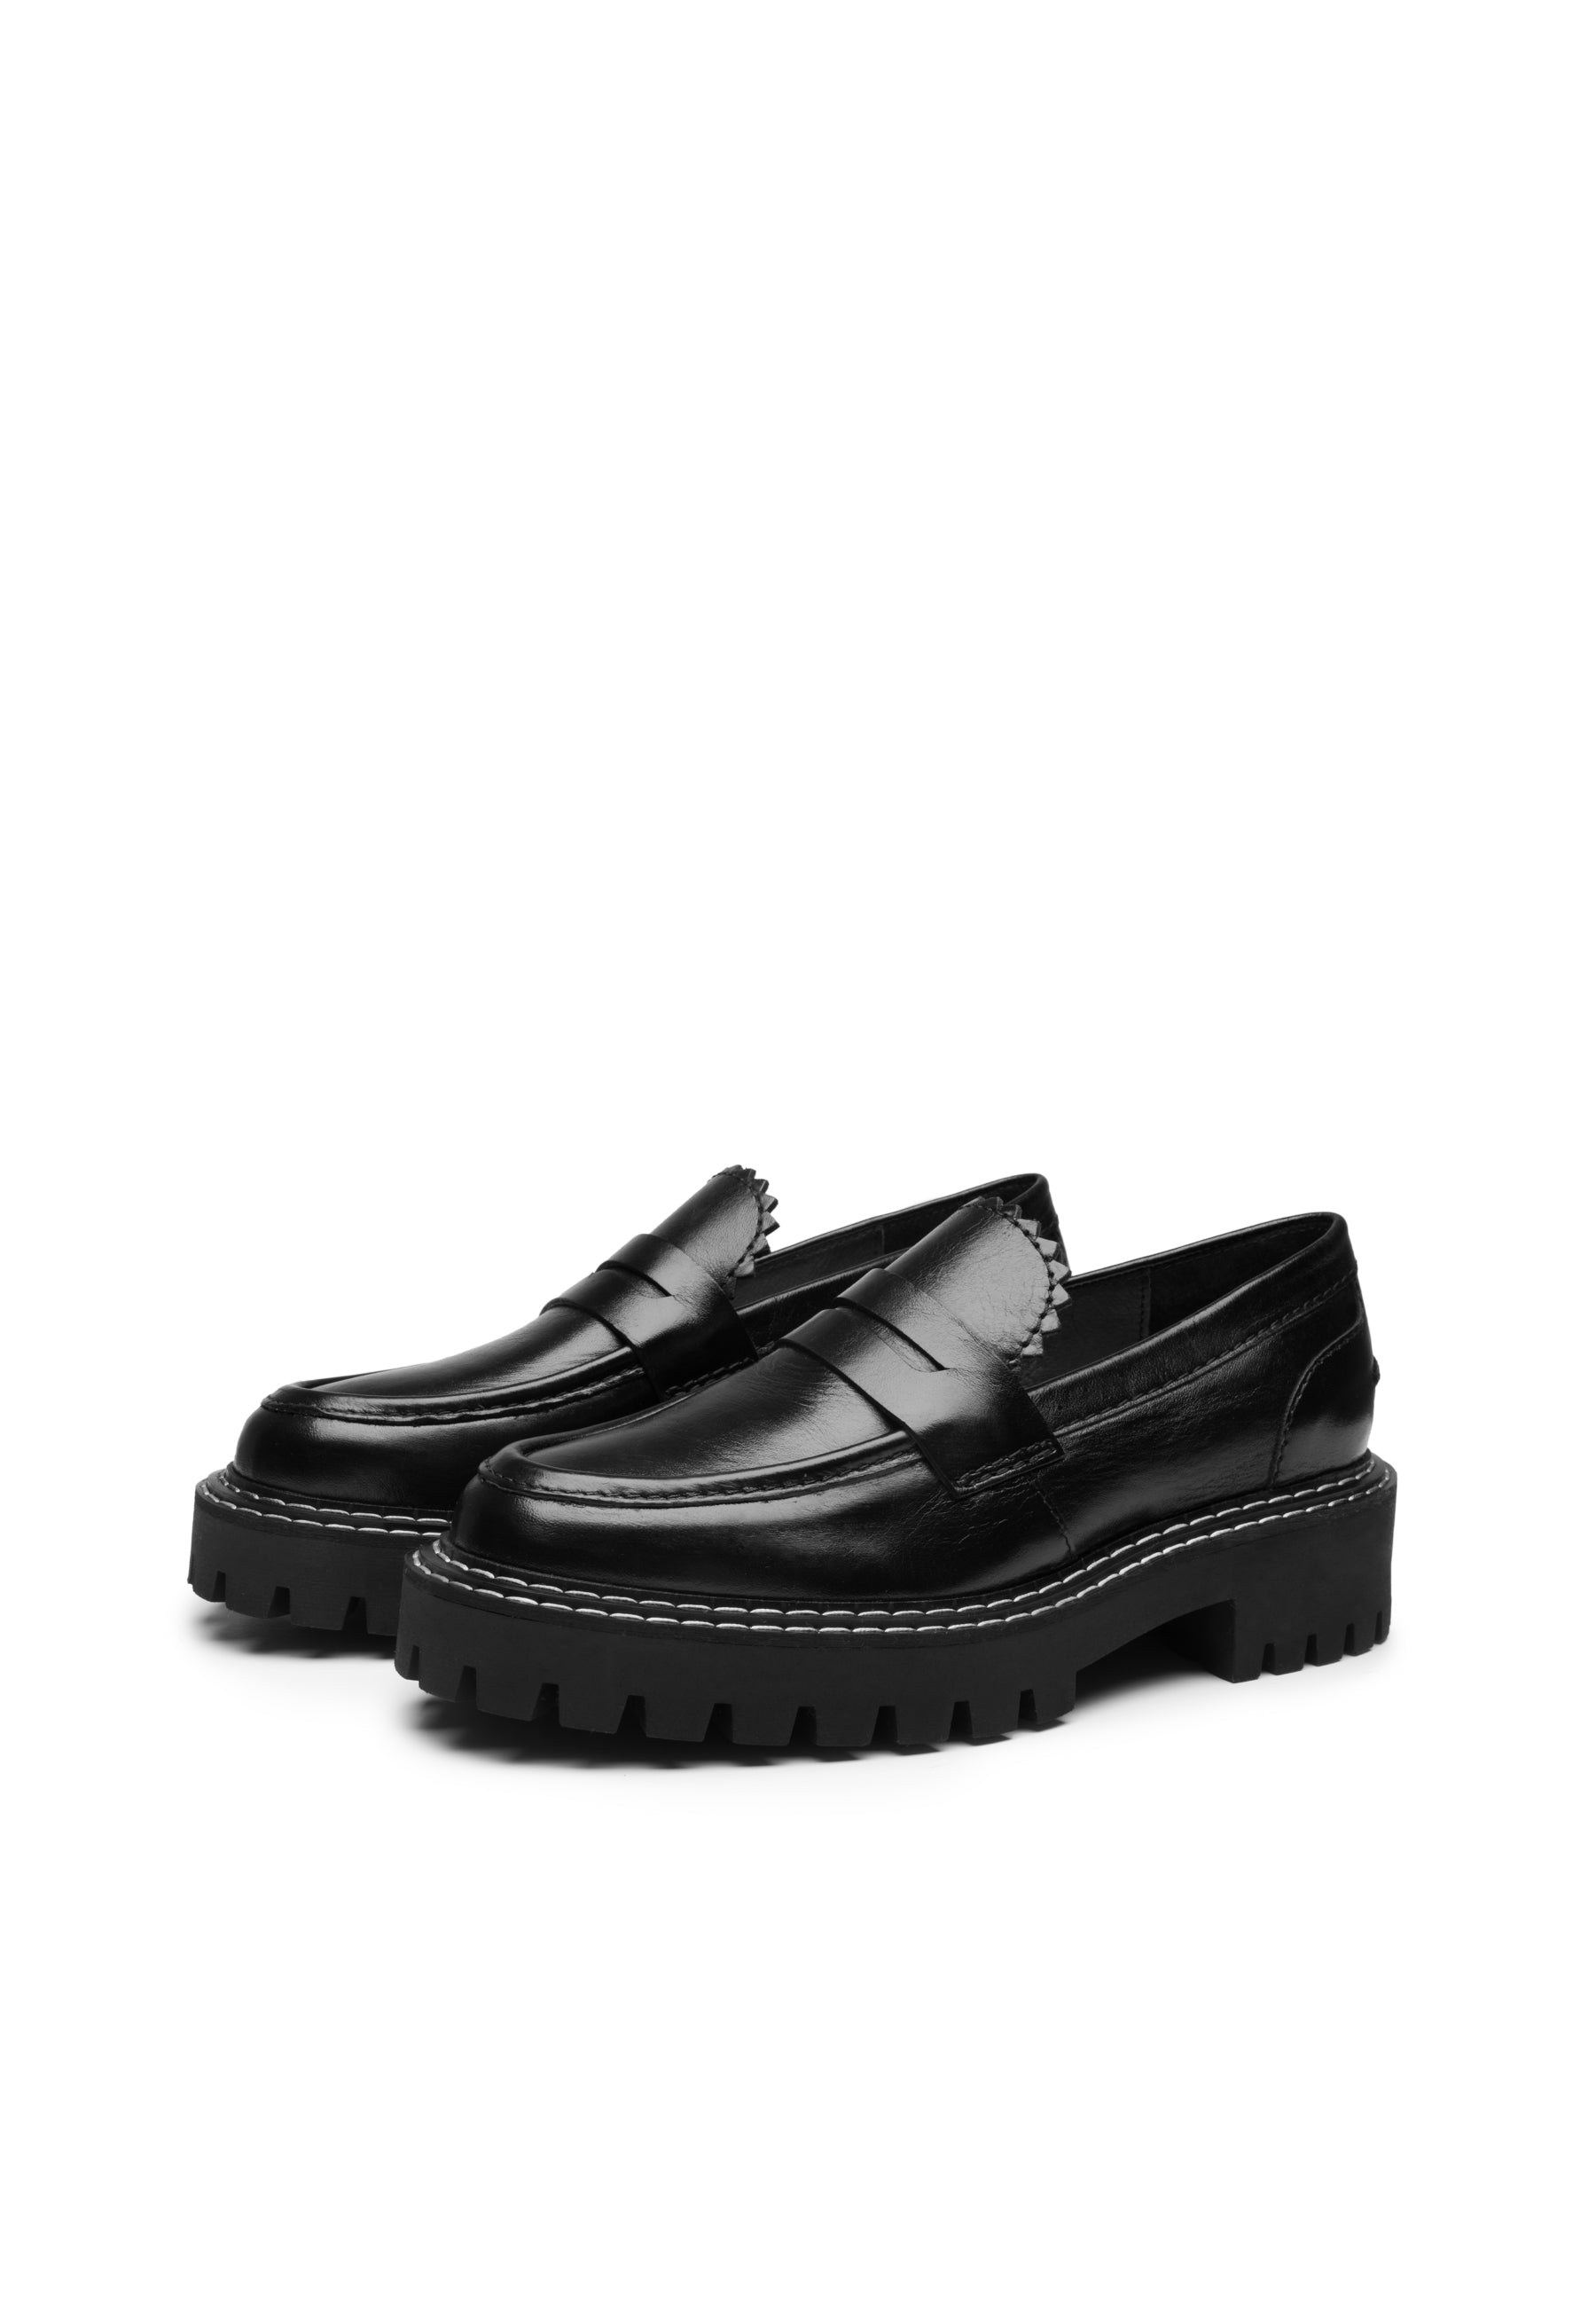 Matter Black Leather Loafers LAST1679 - 3